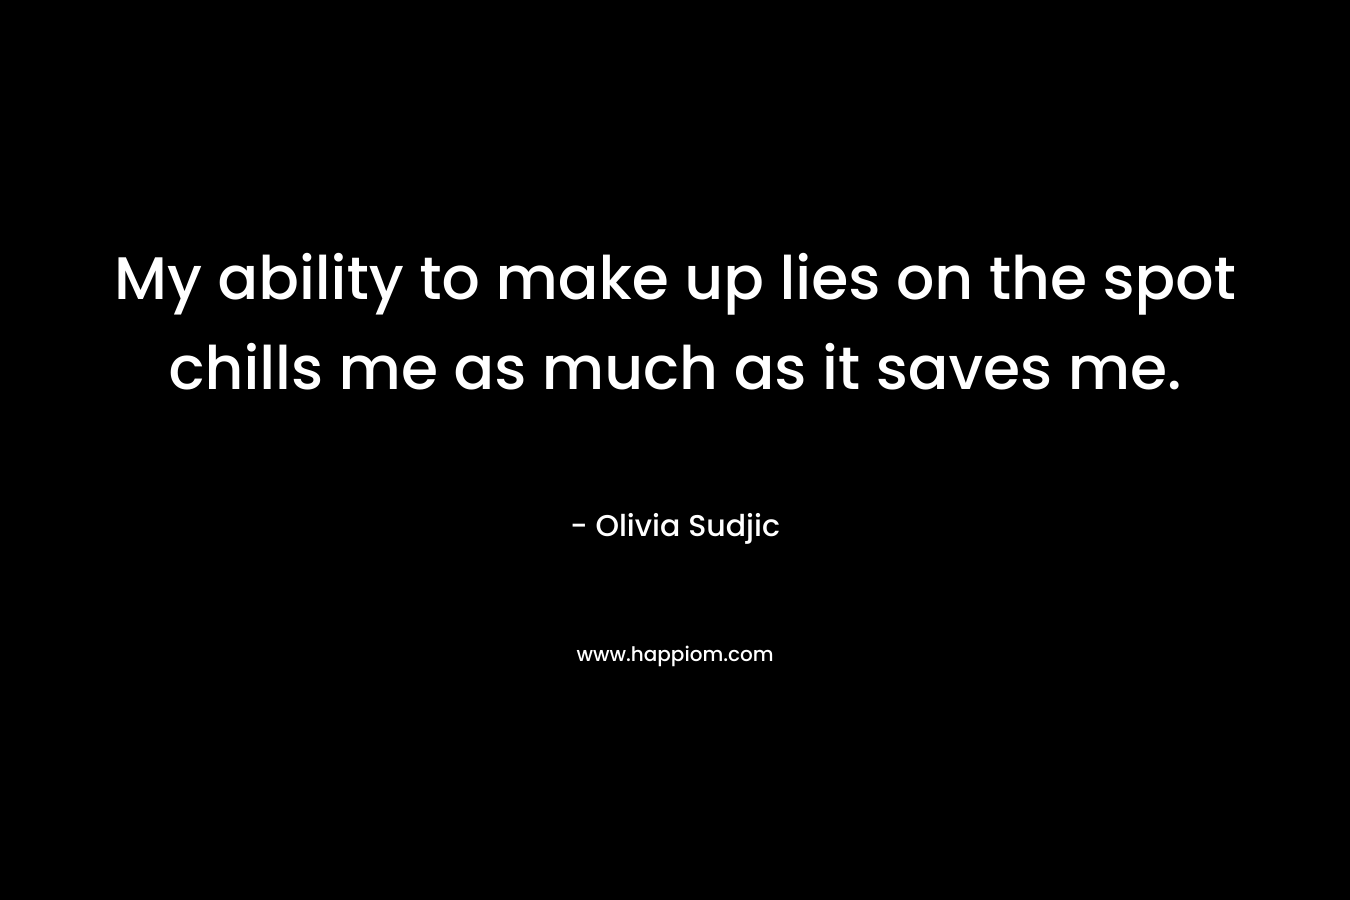 My ability to make up lies on the spot chills me as much as it saves me. – Olivia Sudjic